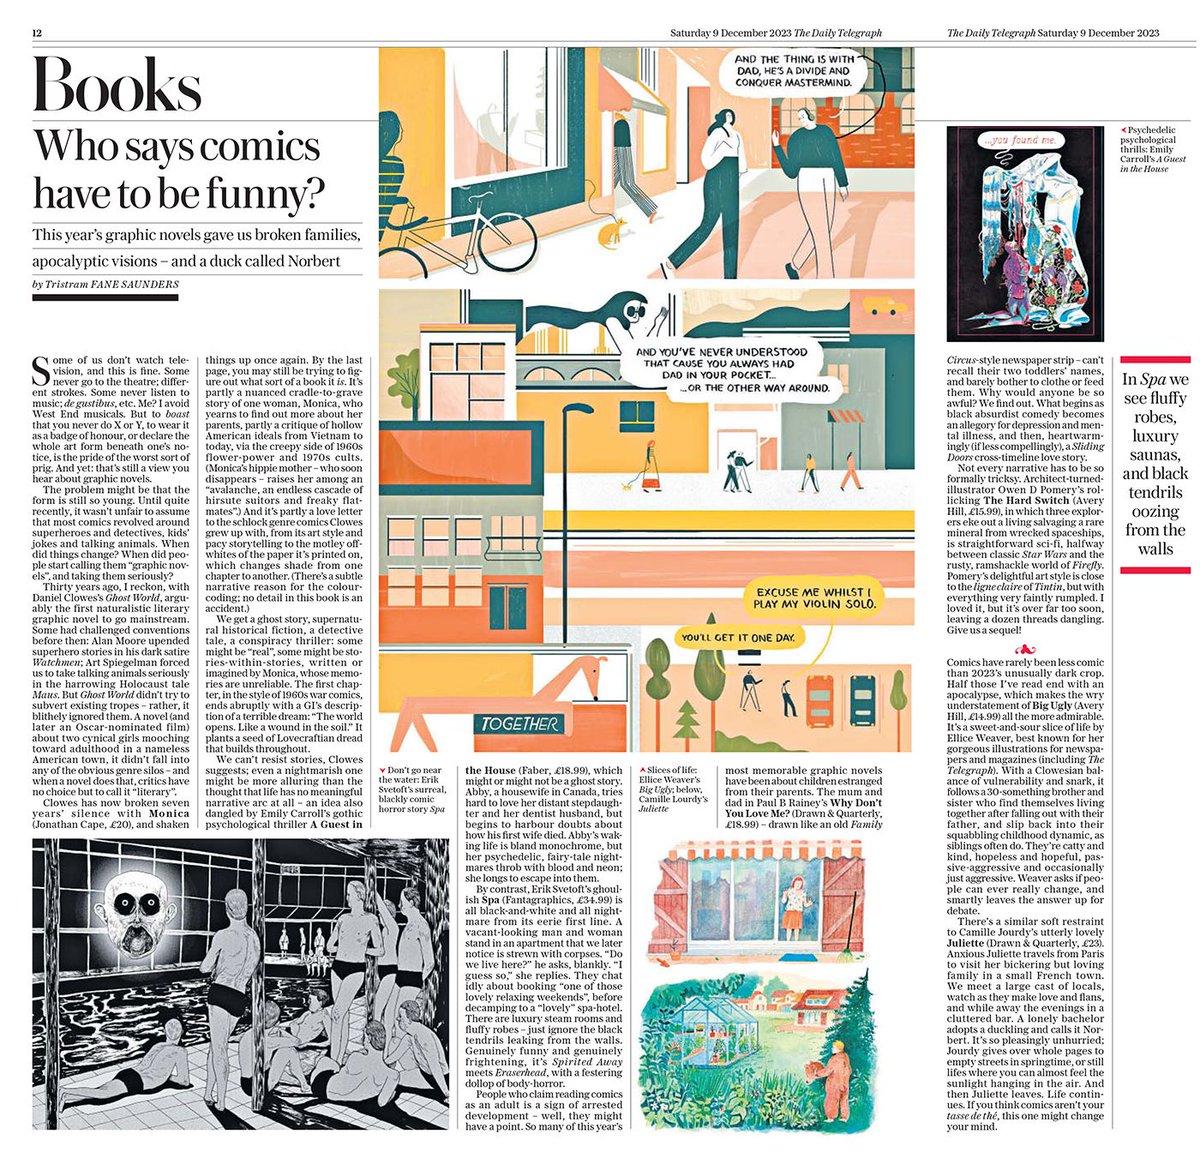 OMG! Avery Hill has been featured in a UK National Newspaper for the first time ever in the @Telegraph! Absolutely lovely spread about Big Ugly by @ElliceWeaver and a great feature of The Hard Switch by @ODPomery! So exciting!! Check out our books here: buff.ly/476YVwB